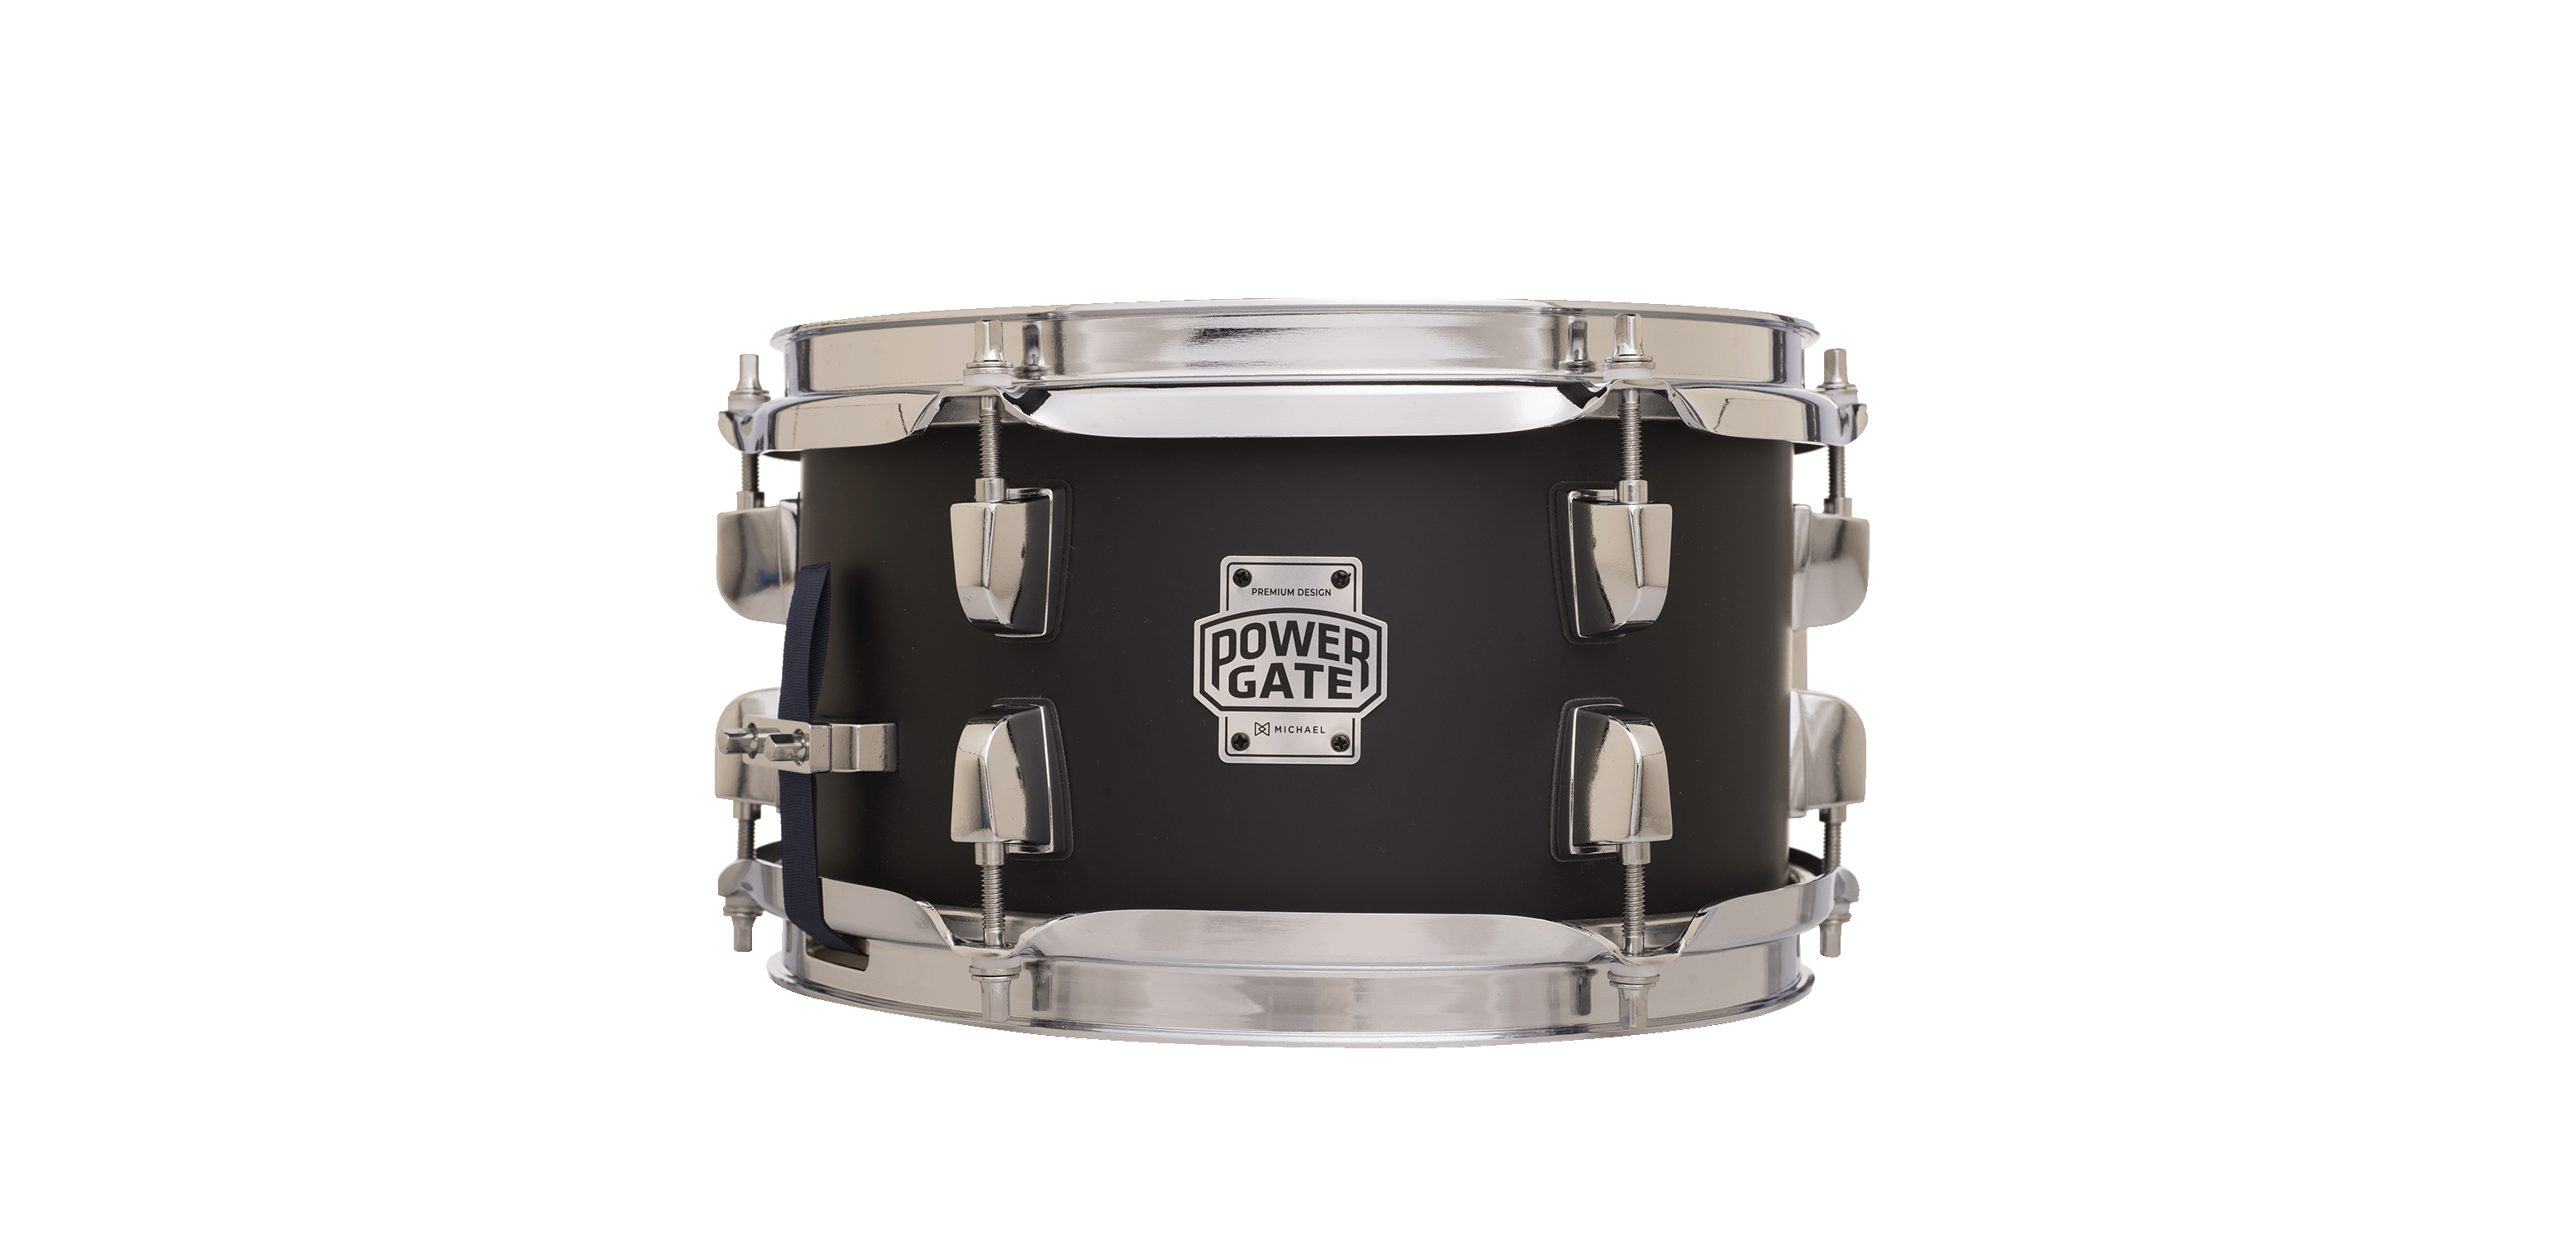 SNARE  MICHAEL POWERGATE STAGE PGS1055 JBK 10x5,5